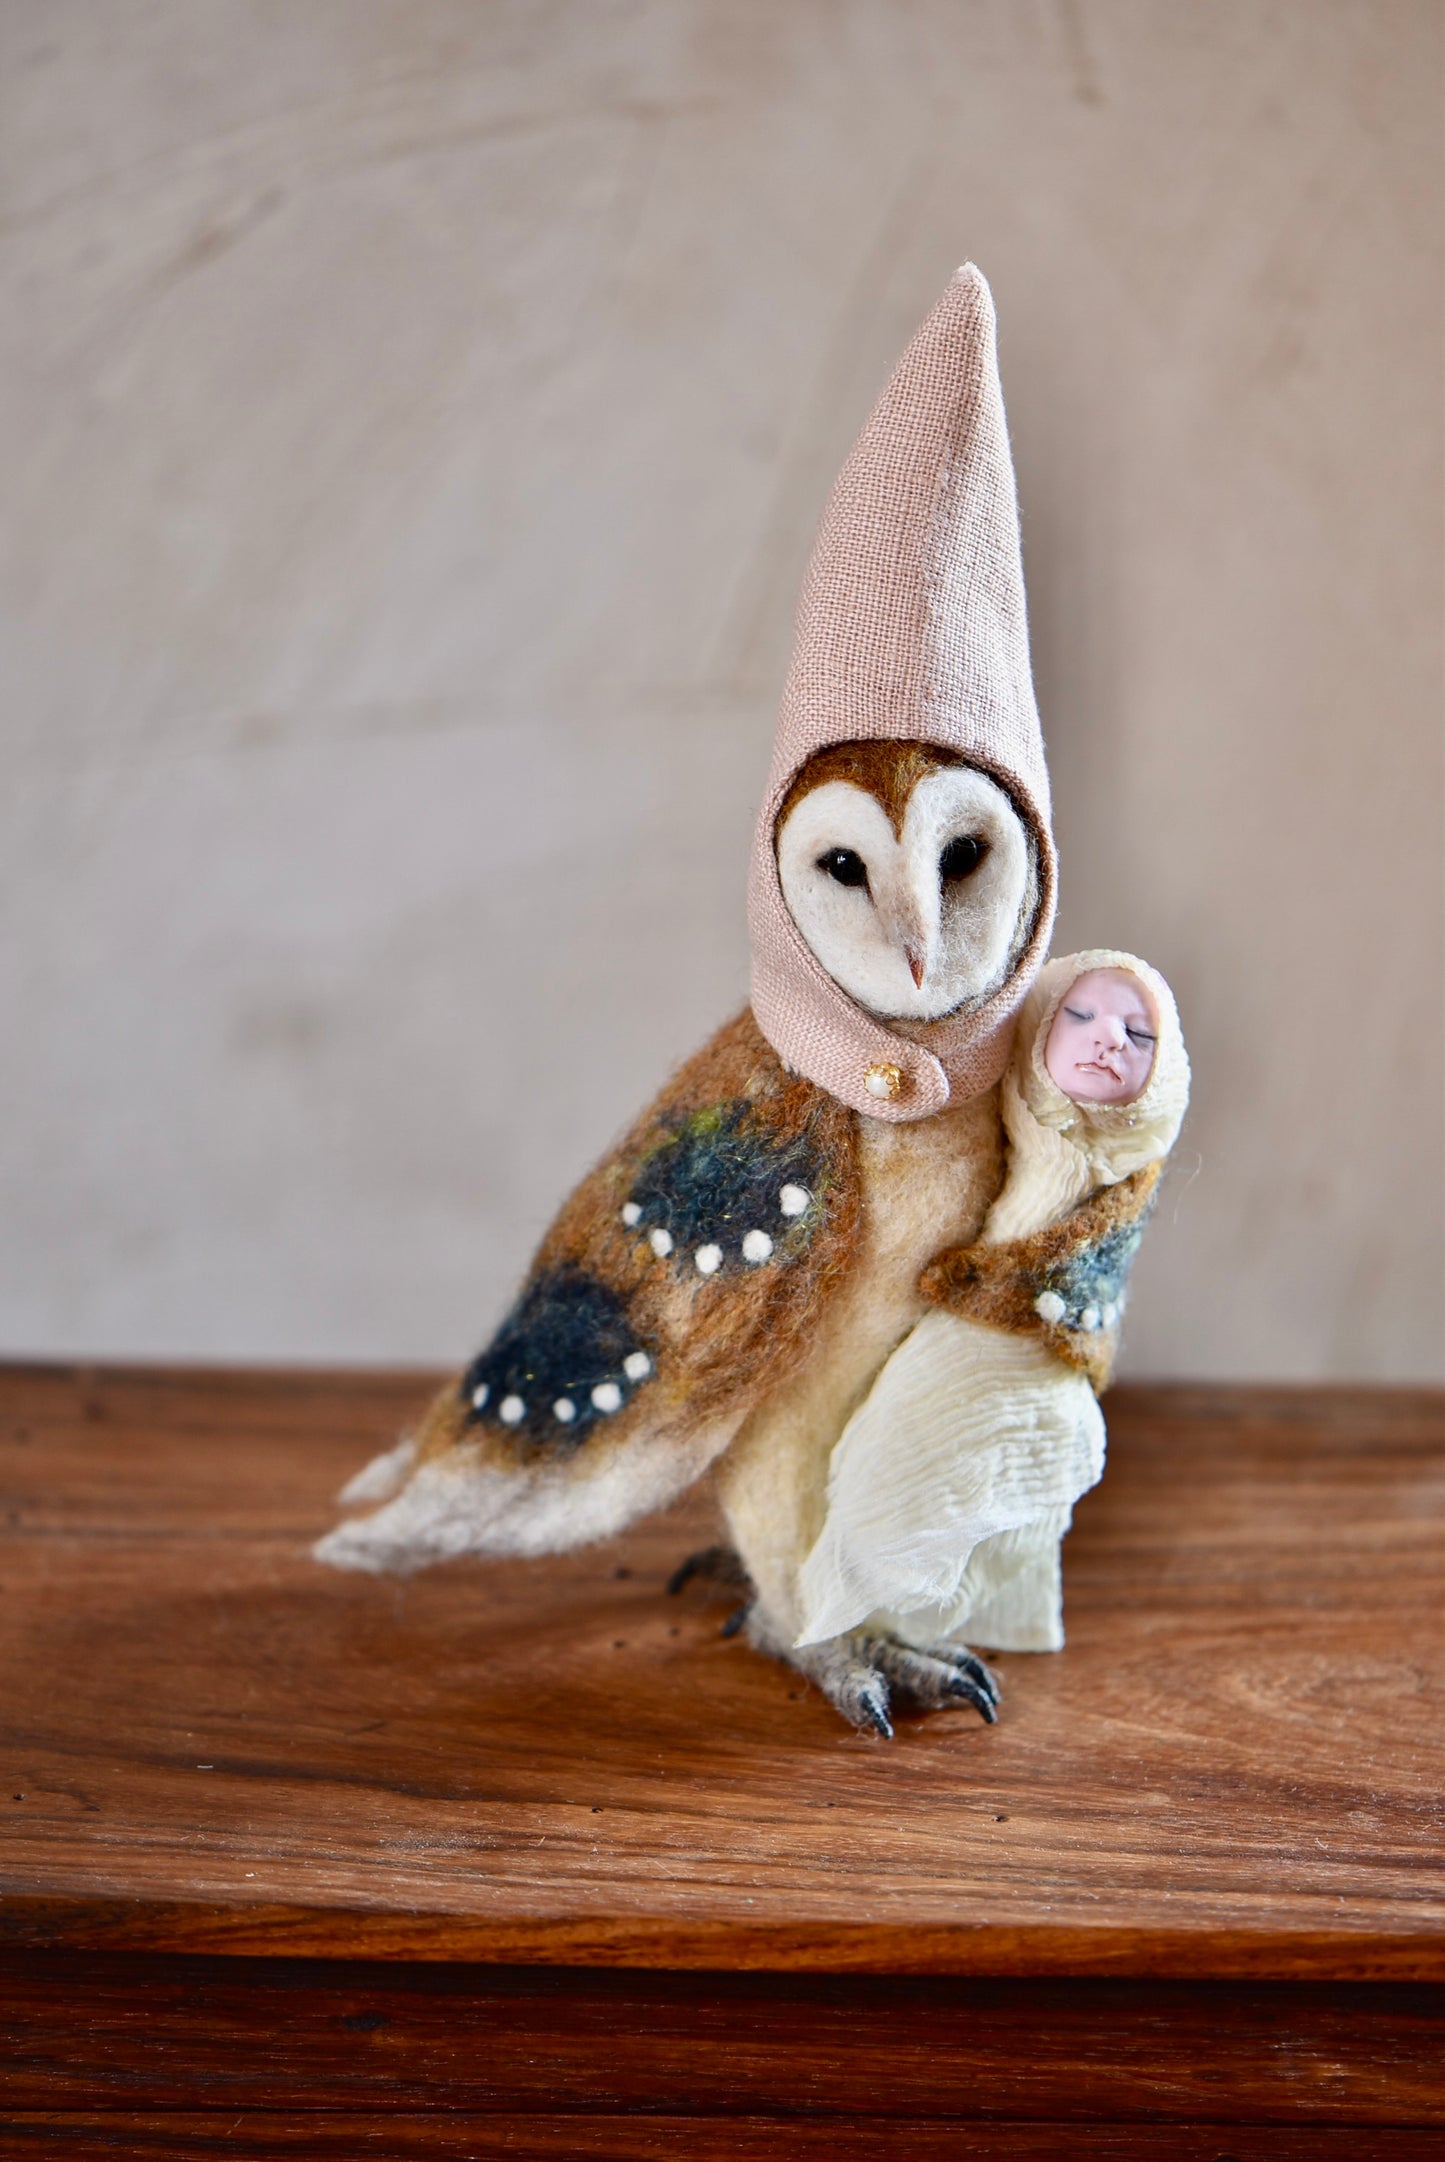 Nursery Godmother With Baby Fairy- Ooak - Harthicune collaboration